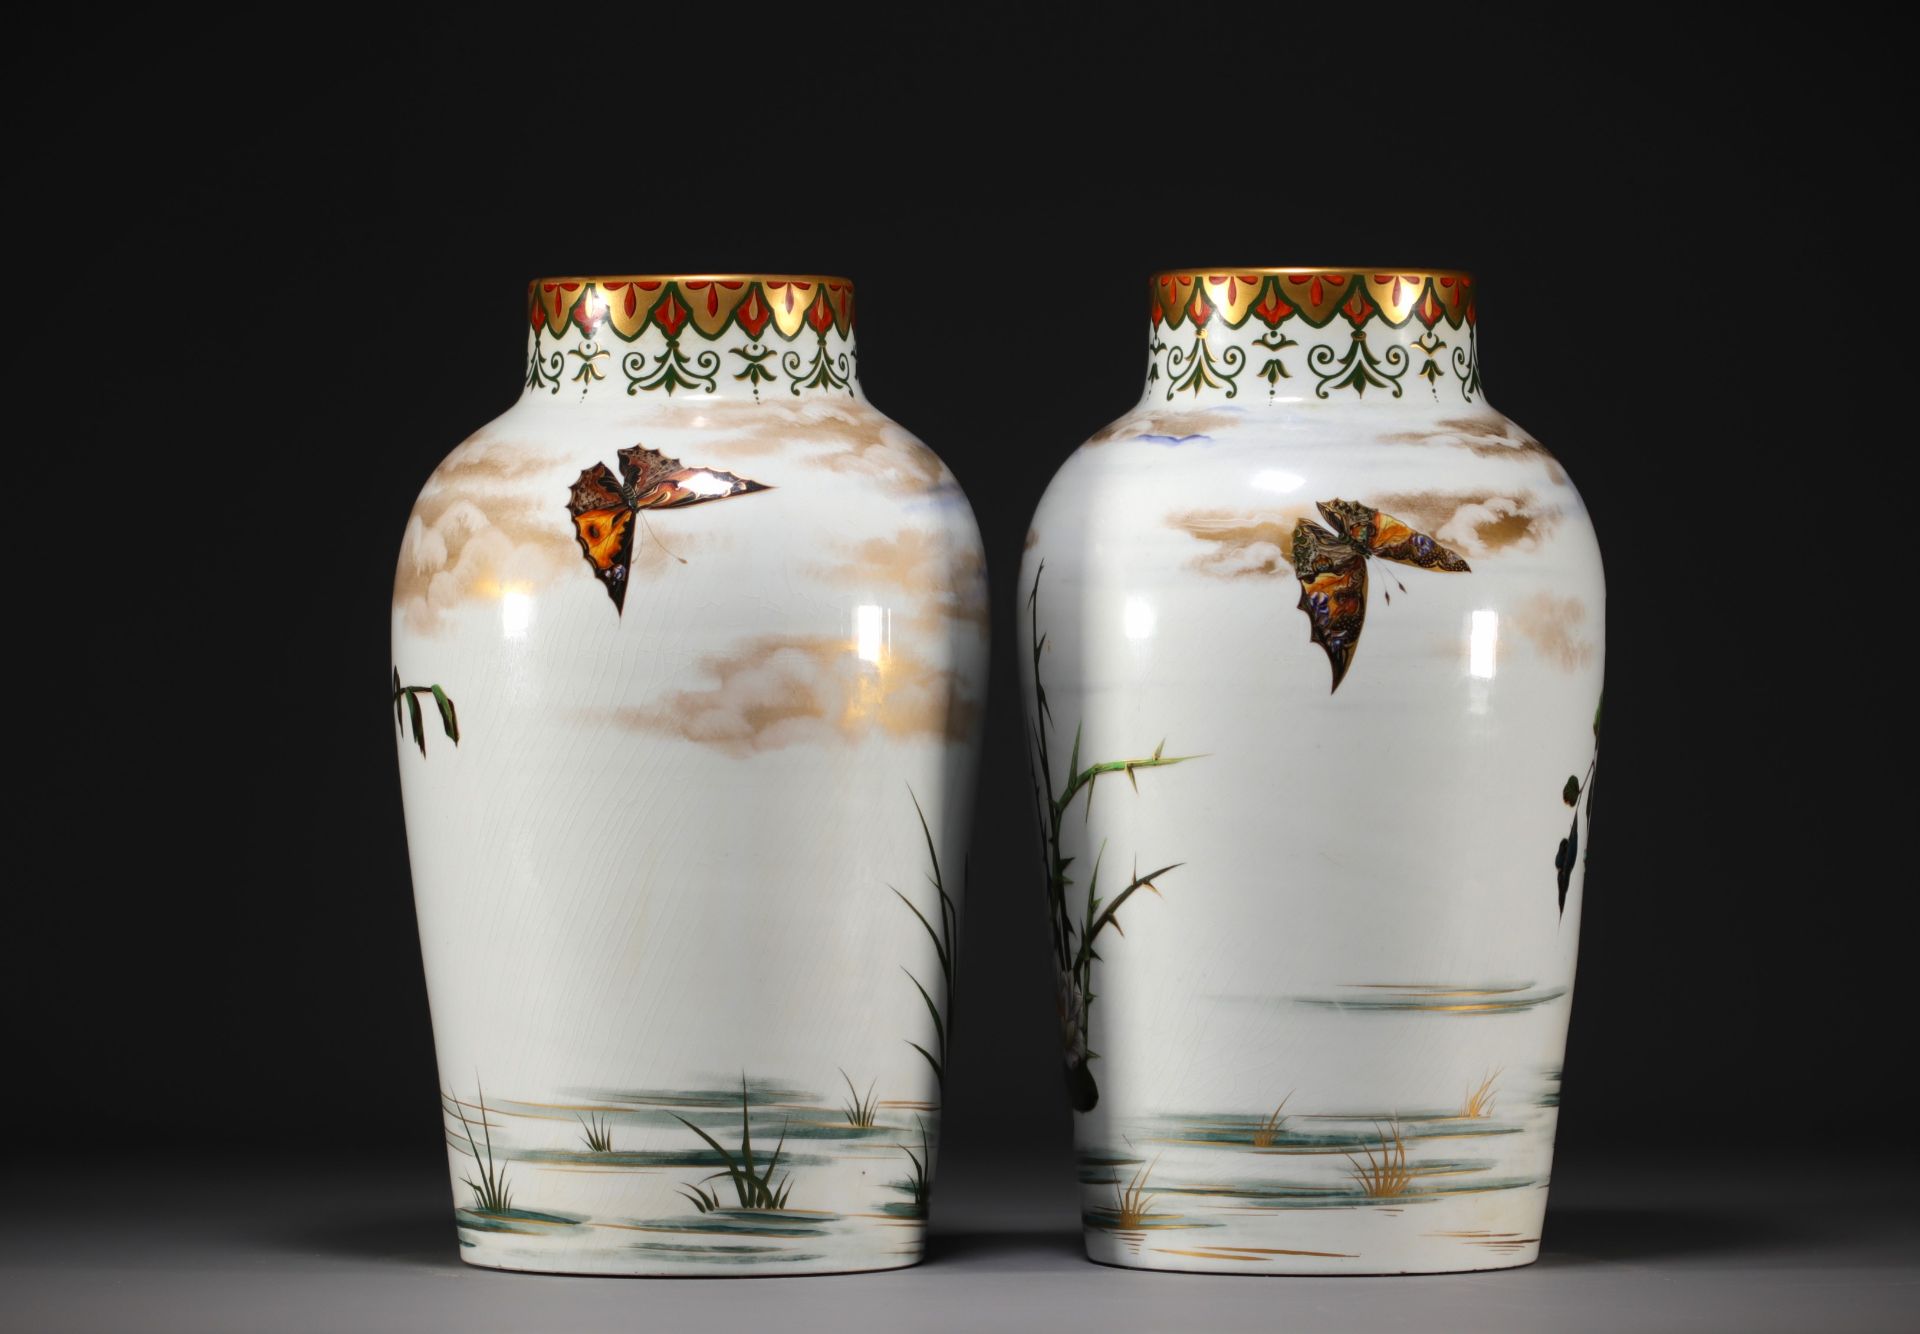 Taxile DOAT (1851-1938) - Pair of Japanese porcelain vases decorated with birds, circa 1900. - Image 2 of 5